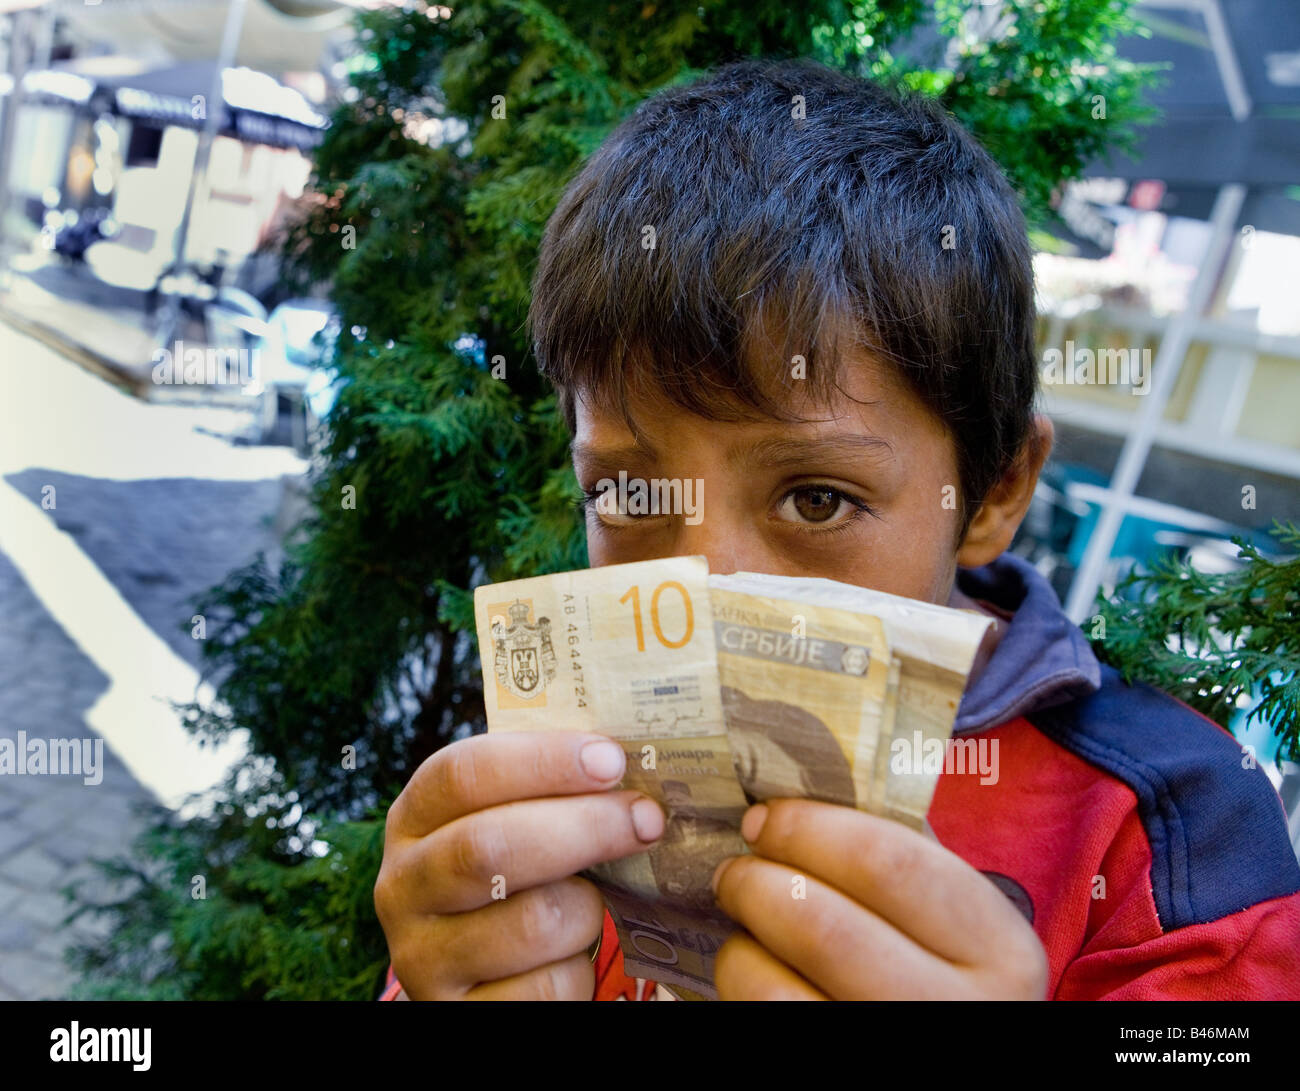 A Roma or gypsy boy beggar in the streets of Nis Serbia with some of the money he has collected by begging Stock Photo